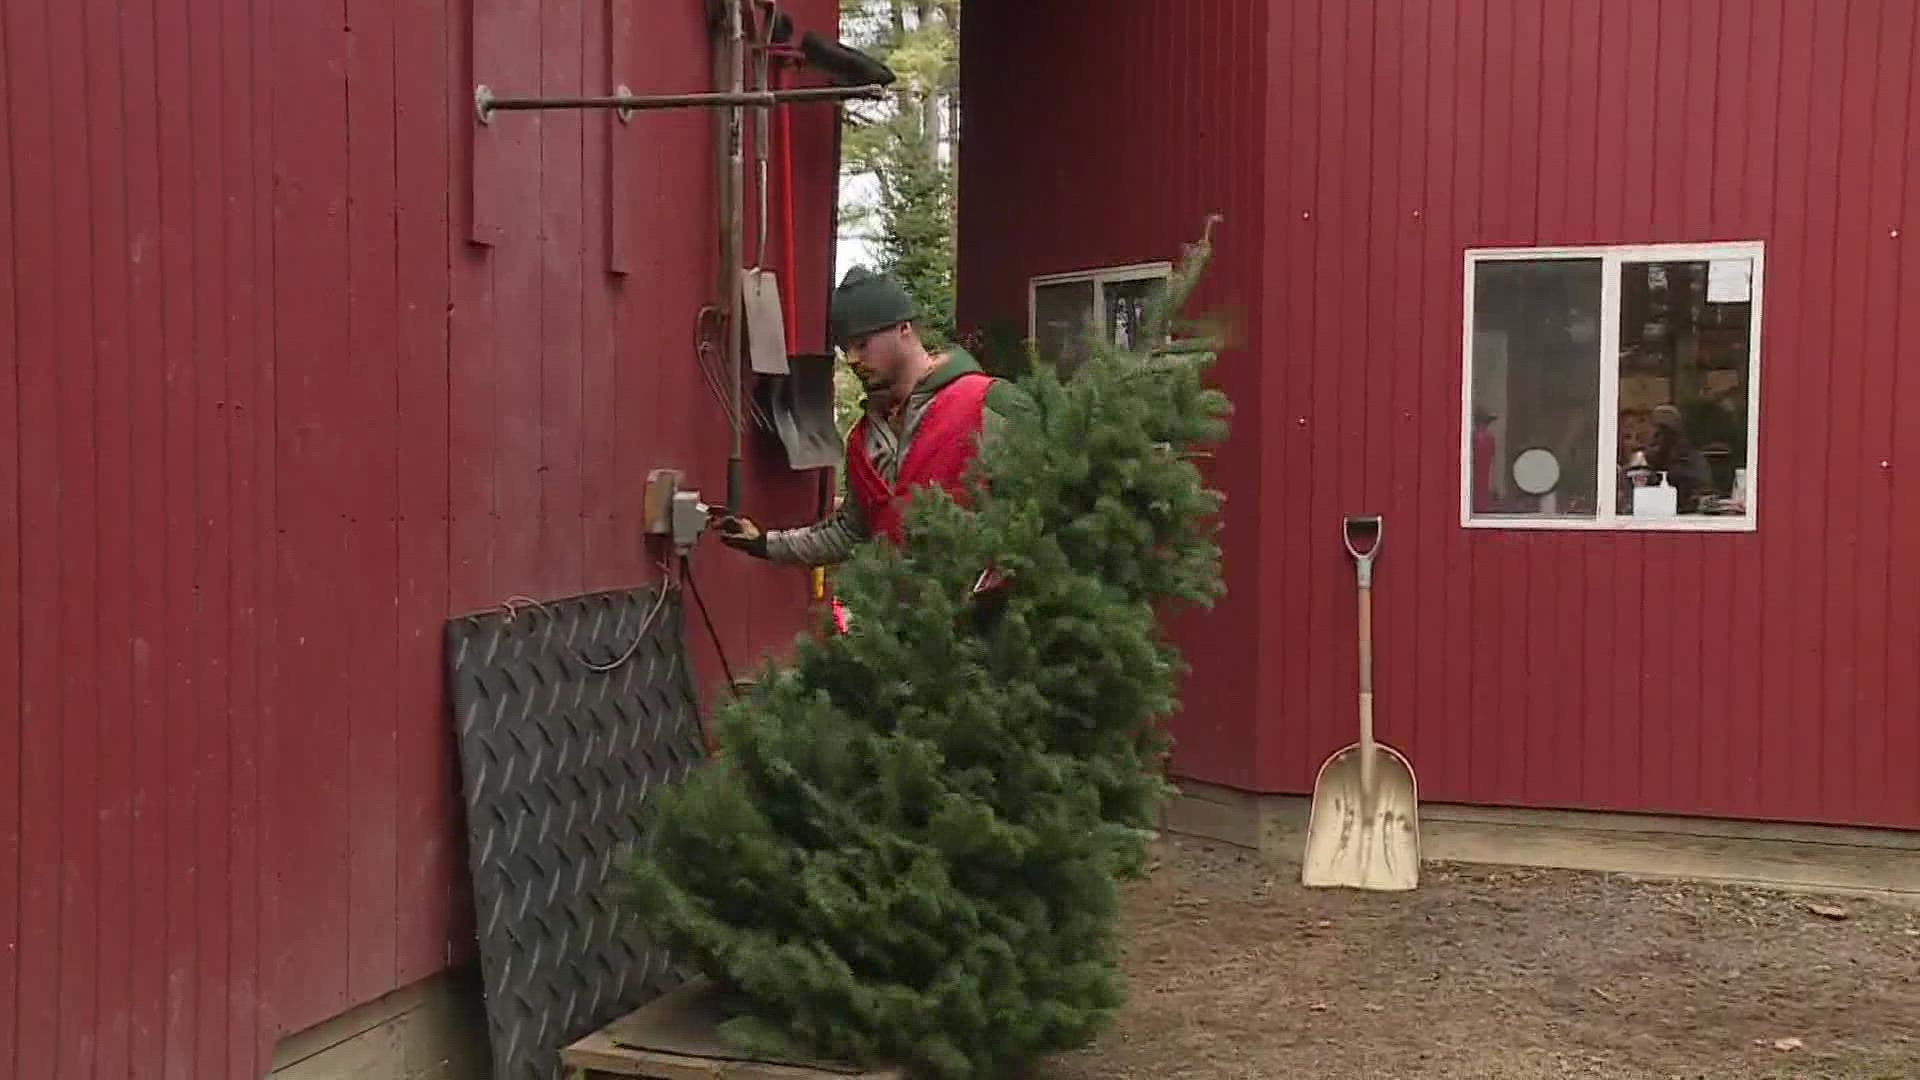 Sugar Pines Farm in Chesterland open for the holiday season. The Geauga County Christmas tree farm features 100 acres of cut-your-own Christmas trees.